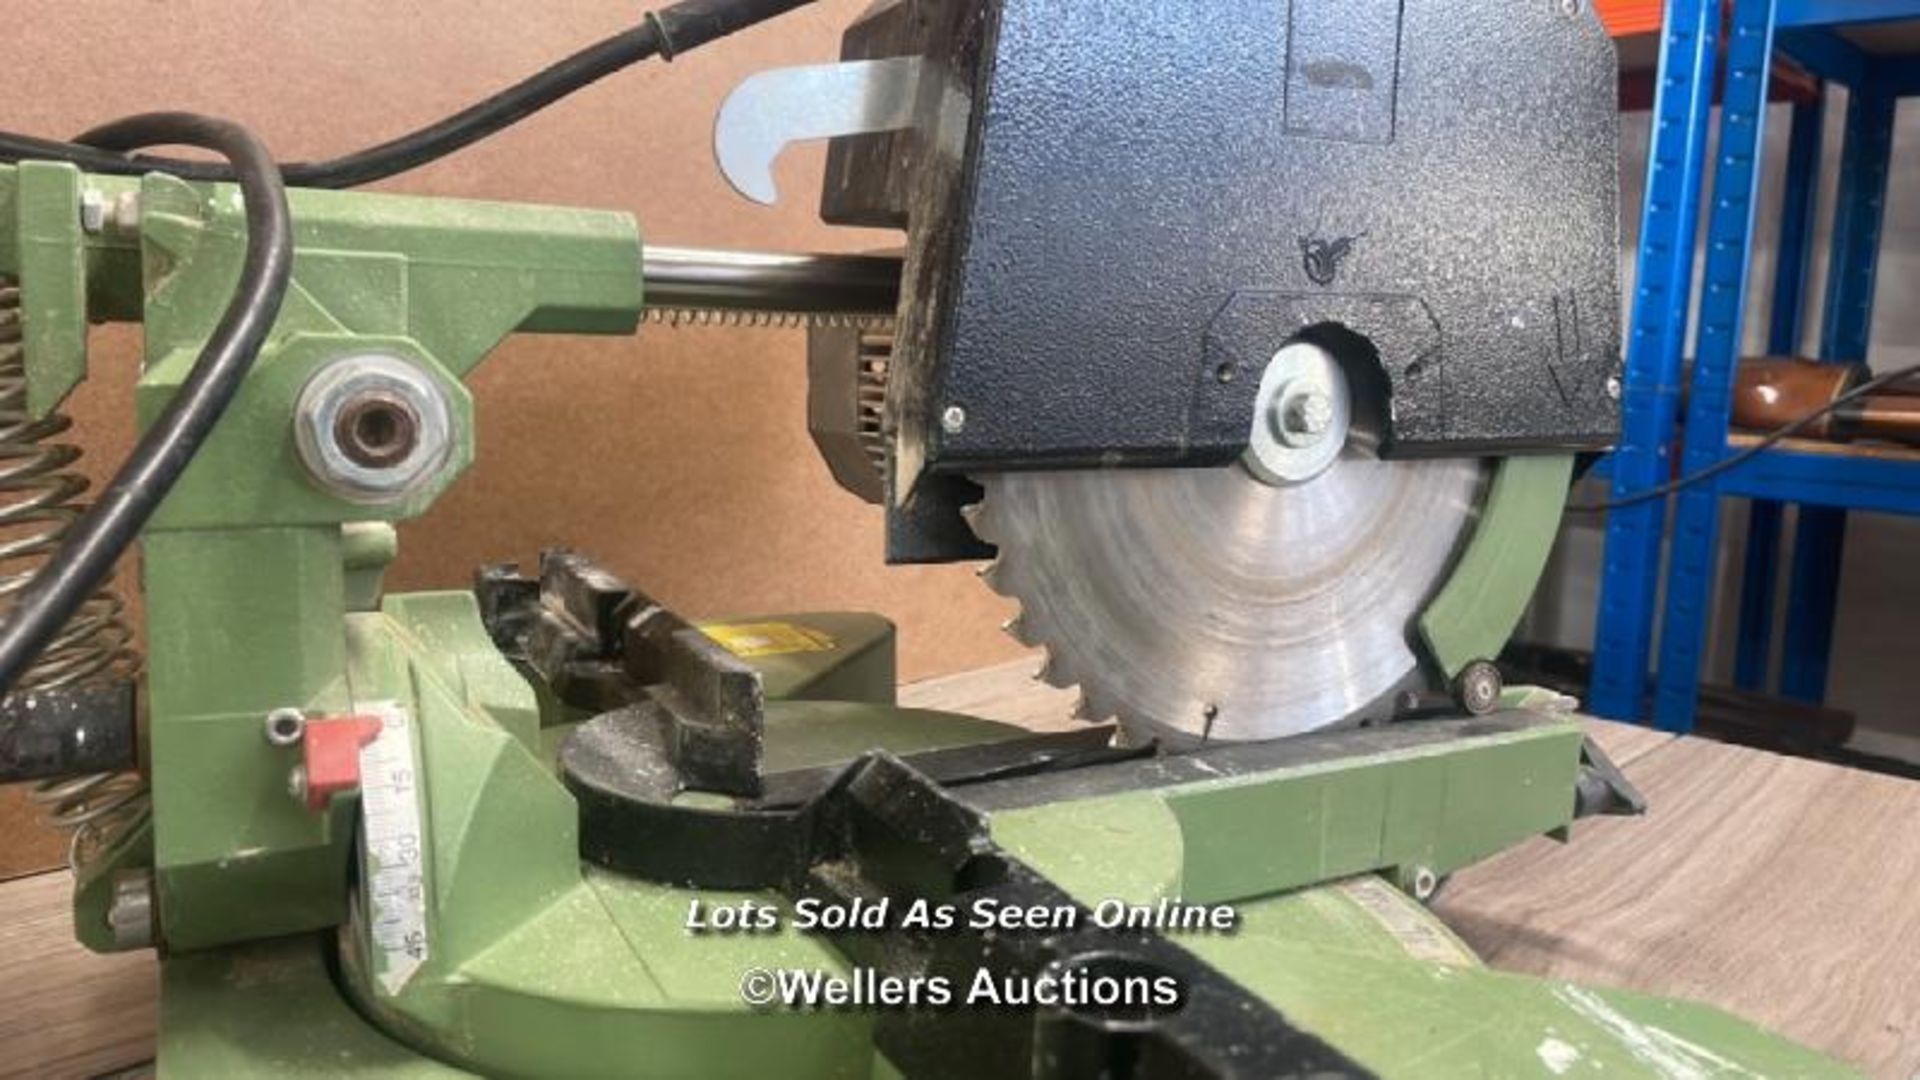 ELEKTRA BECKUM CROSSCUT AND MITRE SAW TYPE KGS 300, POWERS UP AND APPEARS TO BE IN WORKING ORDER. - Bild 4 aus 6